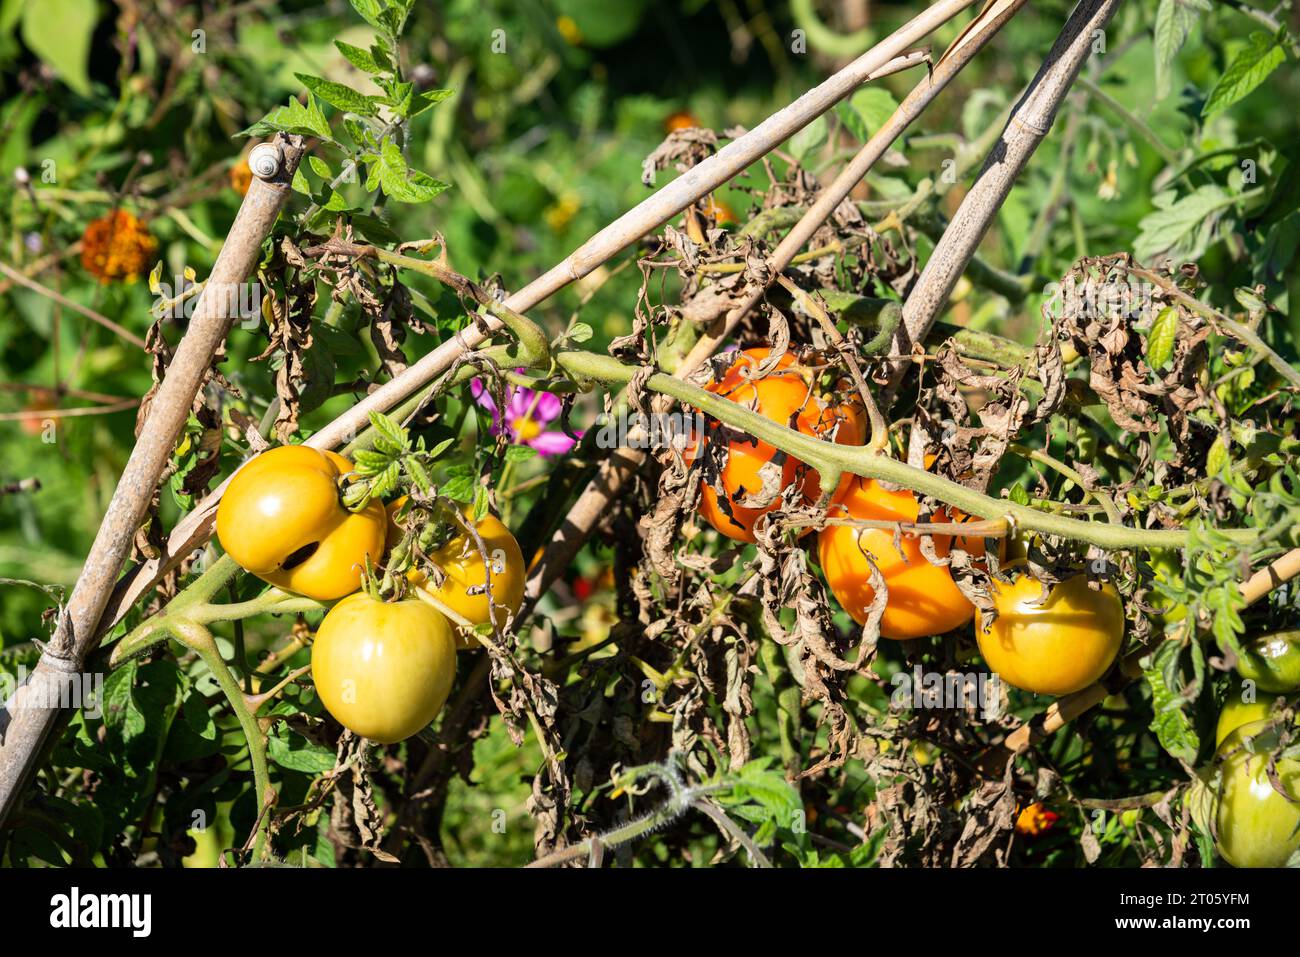 Beefsteak tomatoes ripening in the garden in the sun. Consume local, harvest season concepts. Healthy imperfect untreated homegrown vegetables Stock Photo